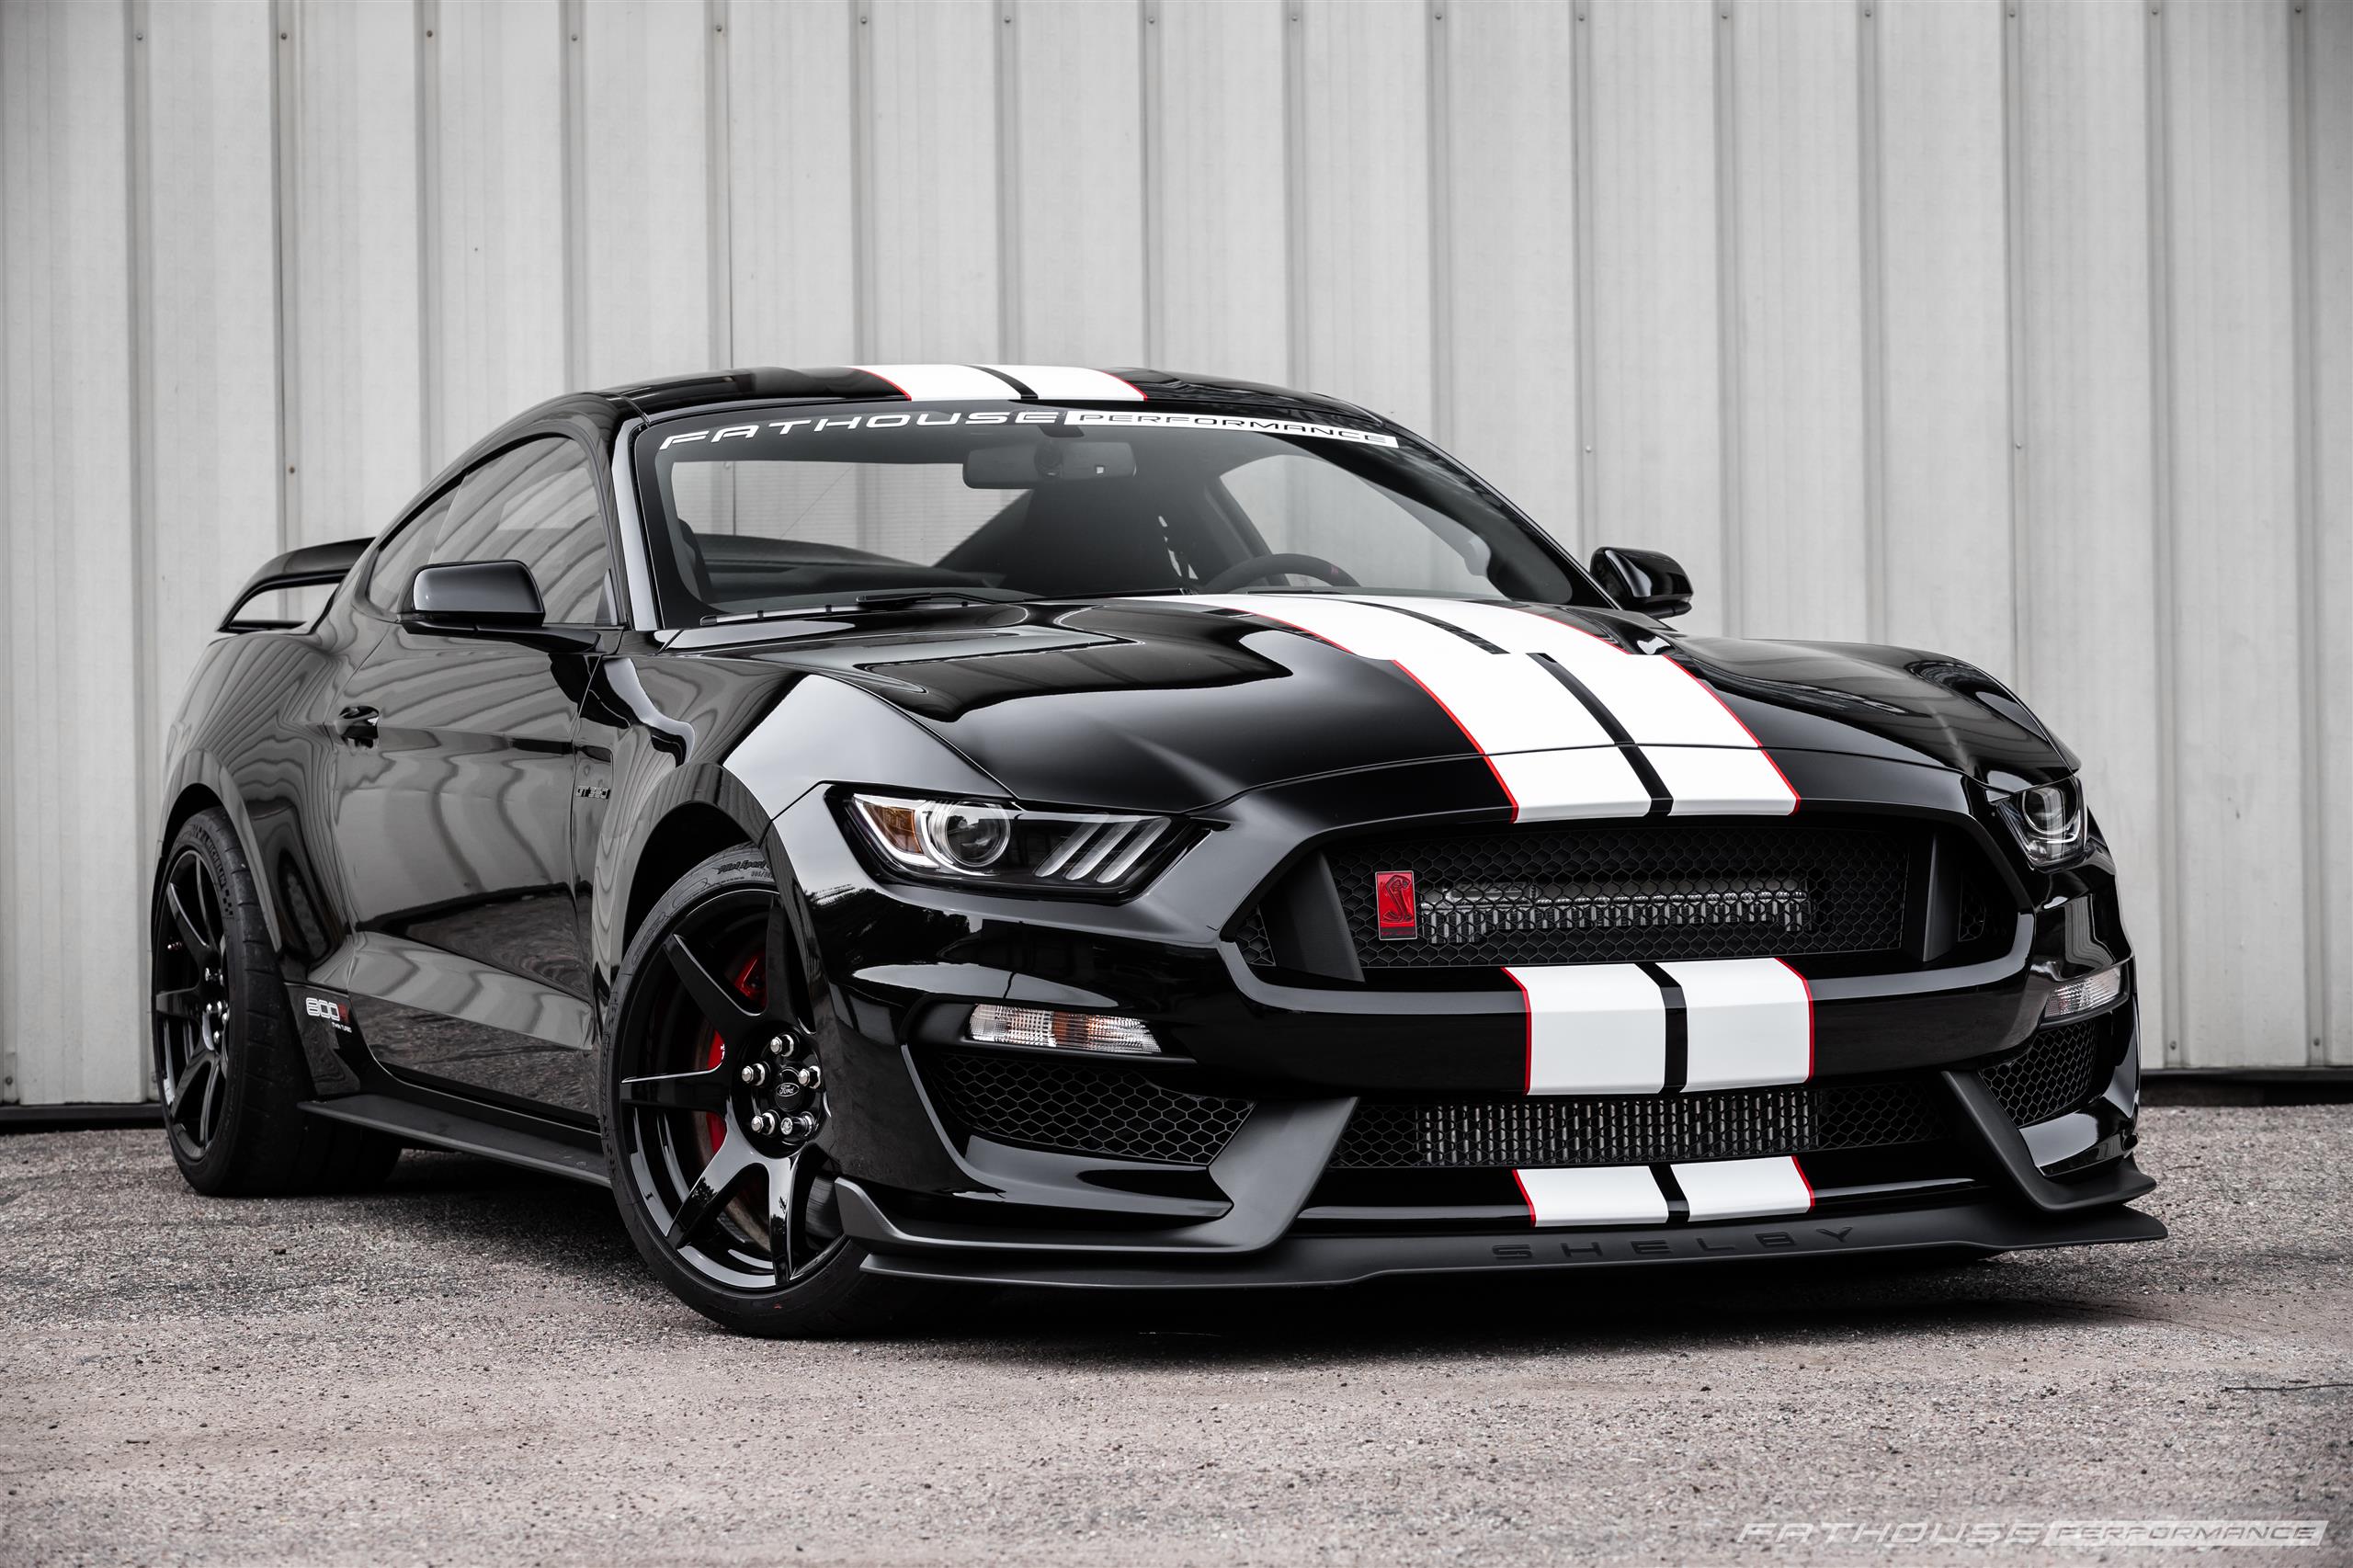 Chris’s 800R Shelby GT350 #22